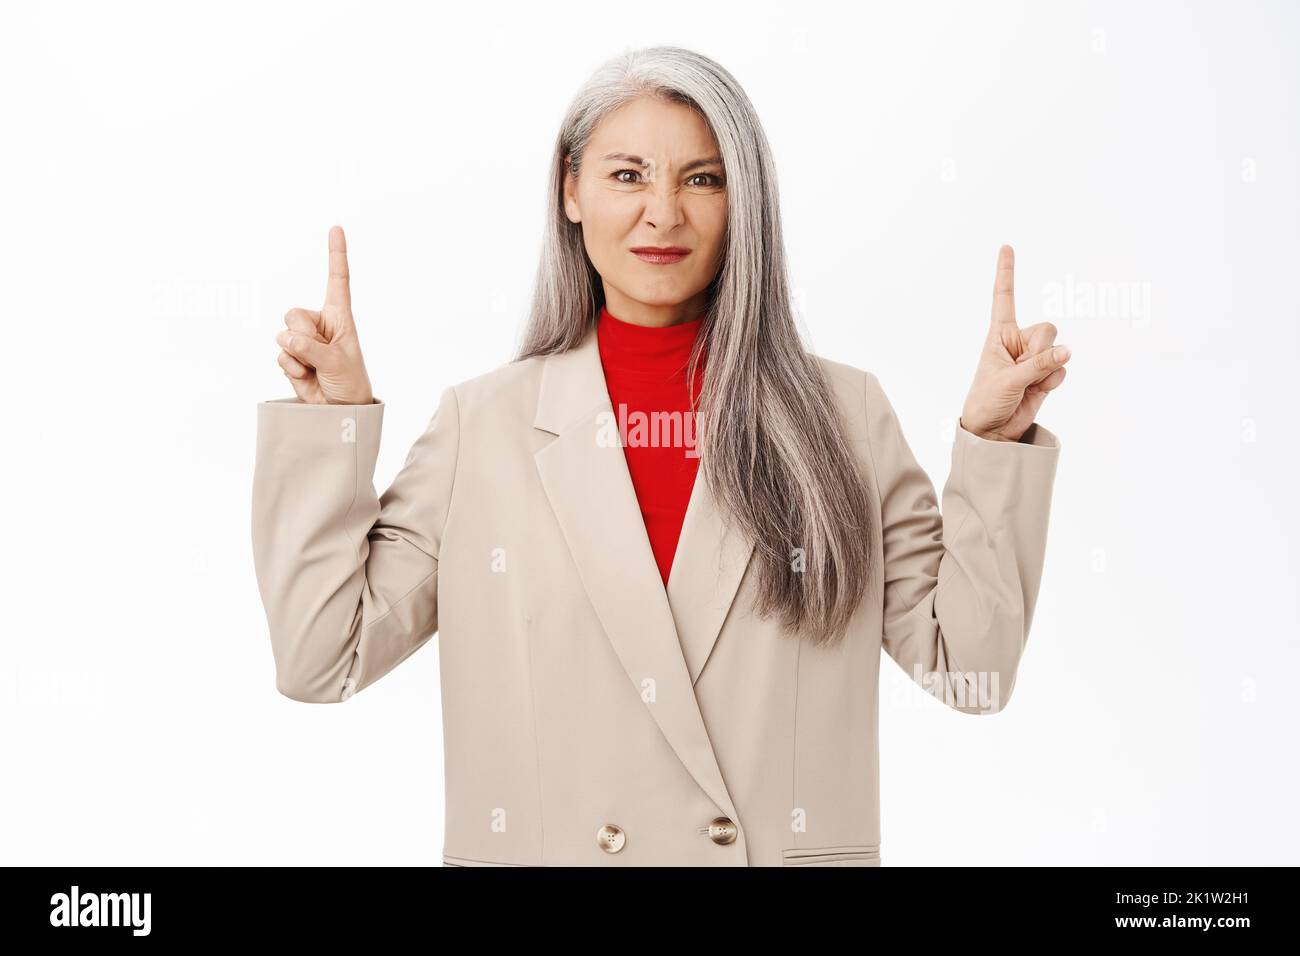 Image of displeased asian female entrepreneur, corporate woman pointing at product and grimacing upset, standing over white background. Stock Photo